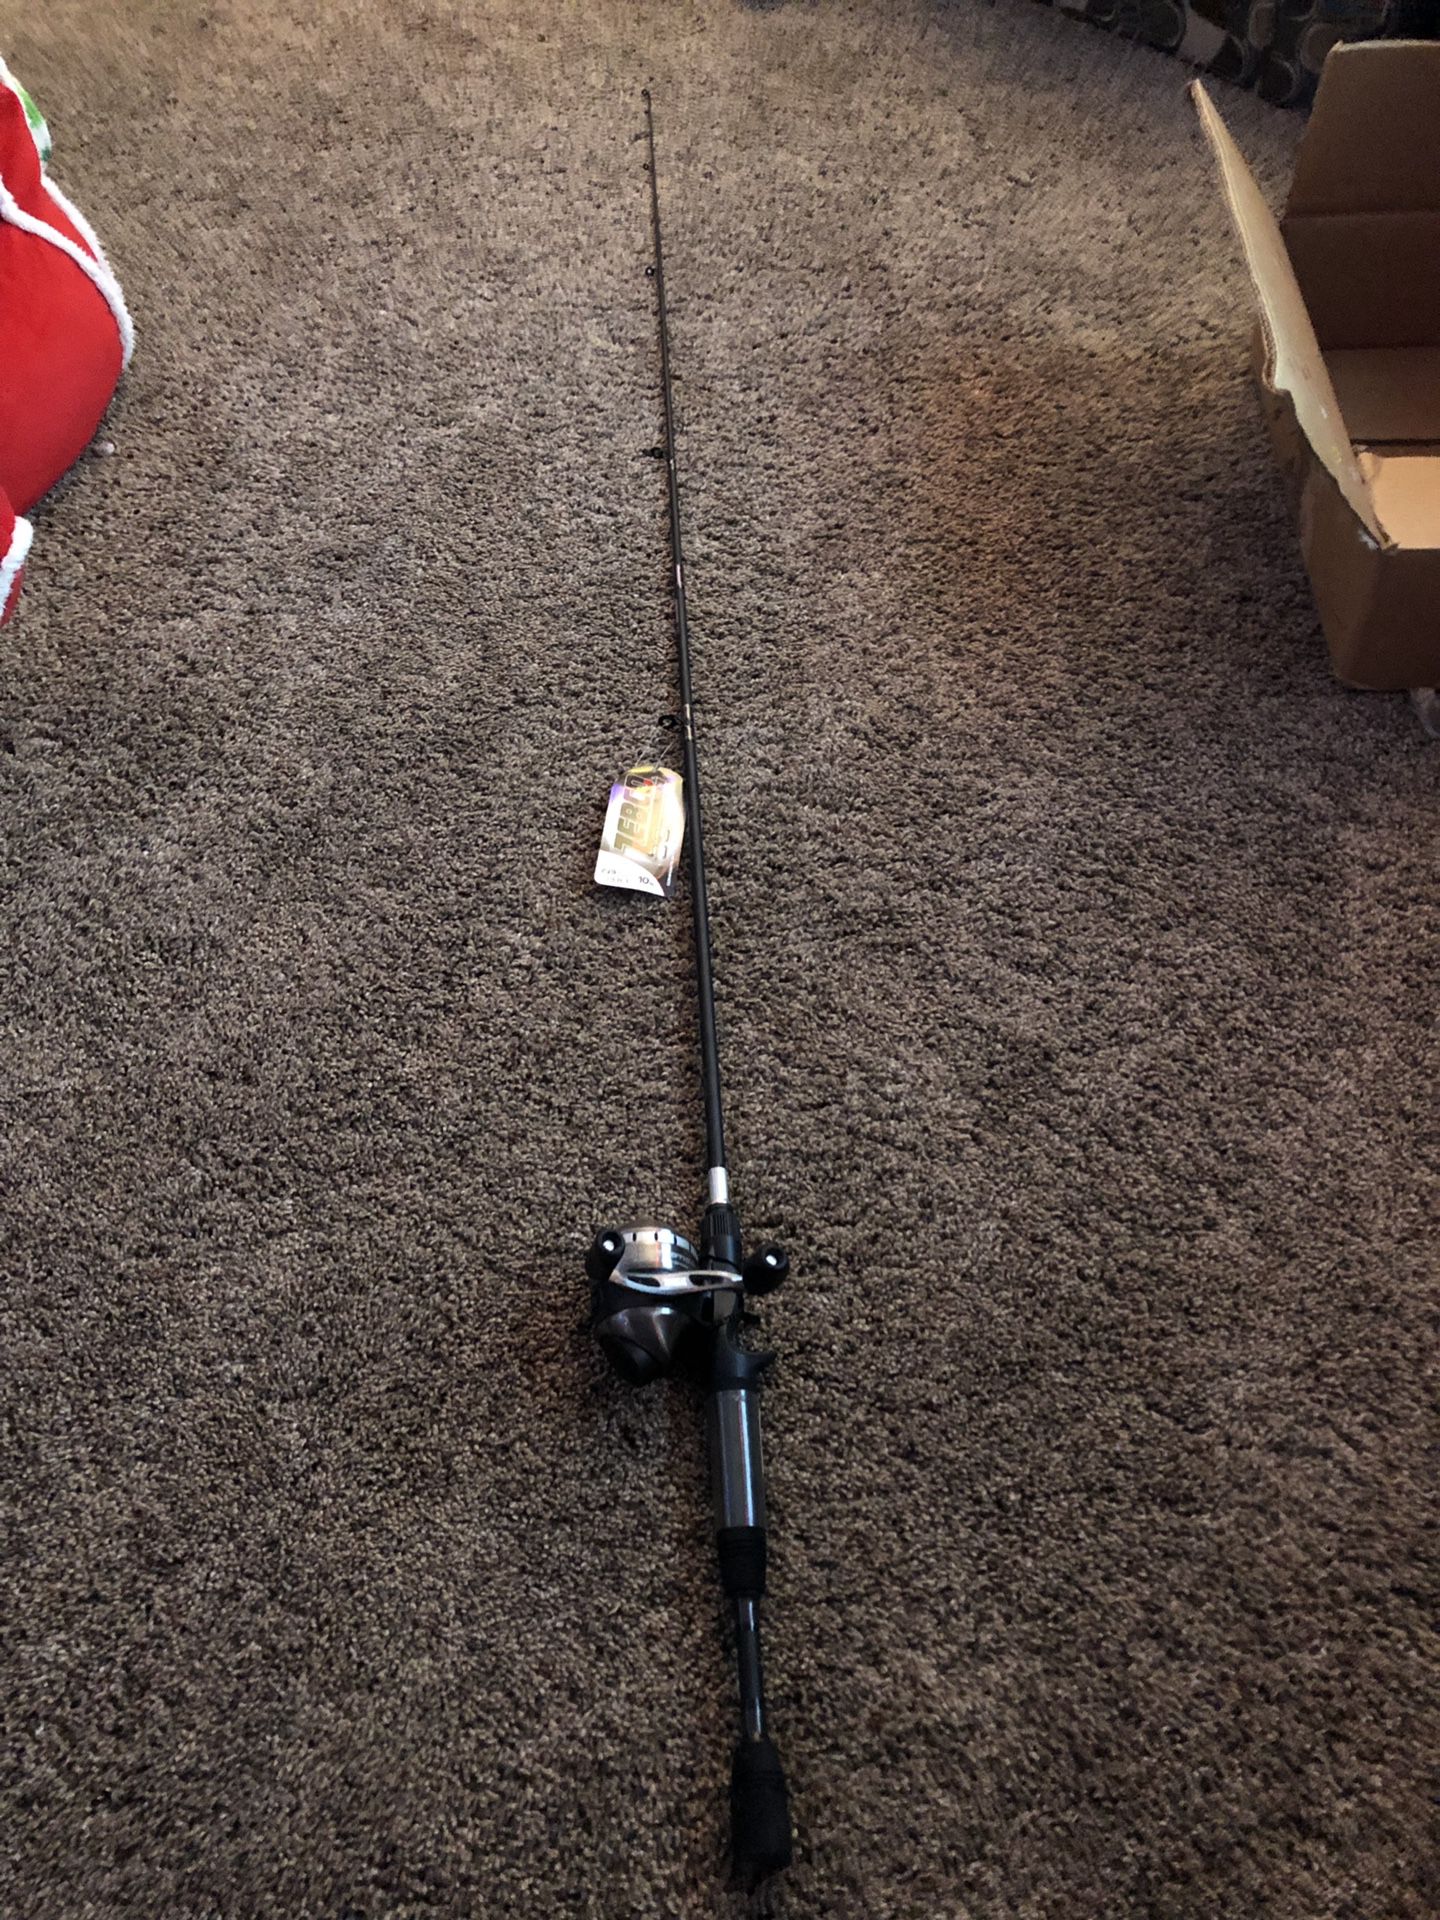 Brand new Zebco 33 tactical composite graphite fishing rod